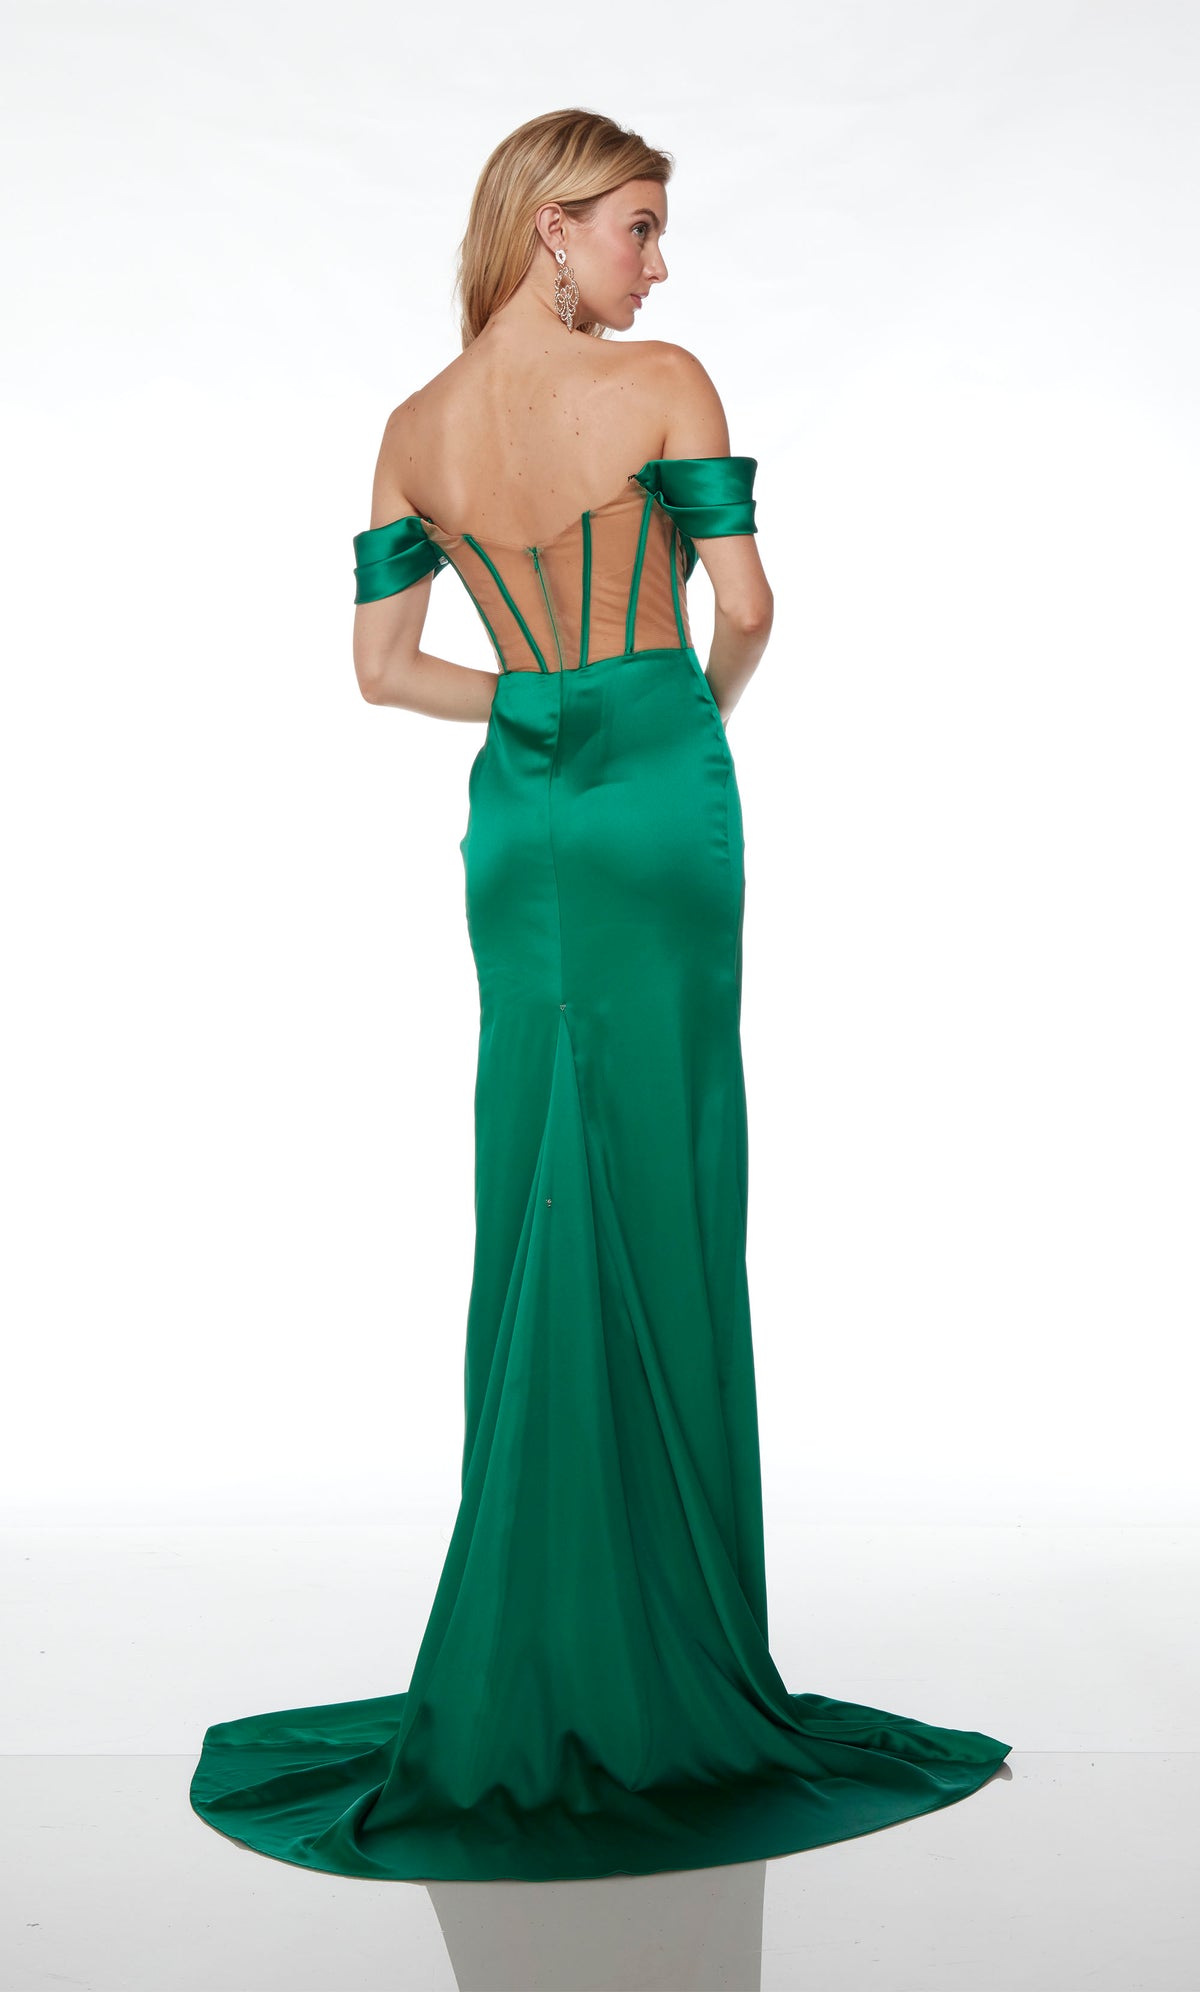 Emerald-tan satin prom dress: Off-the-shoulder cowl neckline, detachable straps, sheer corset bodice, gathered skirt detail, and an elegant long train.